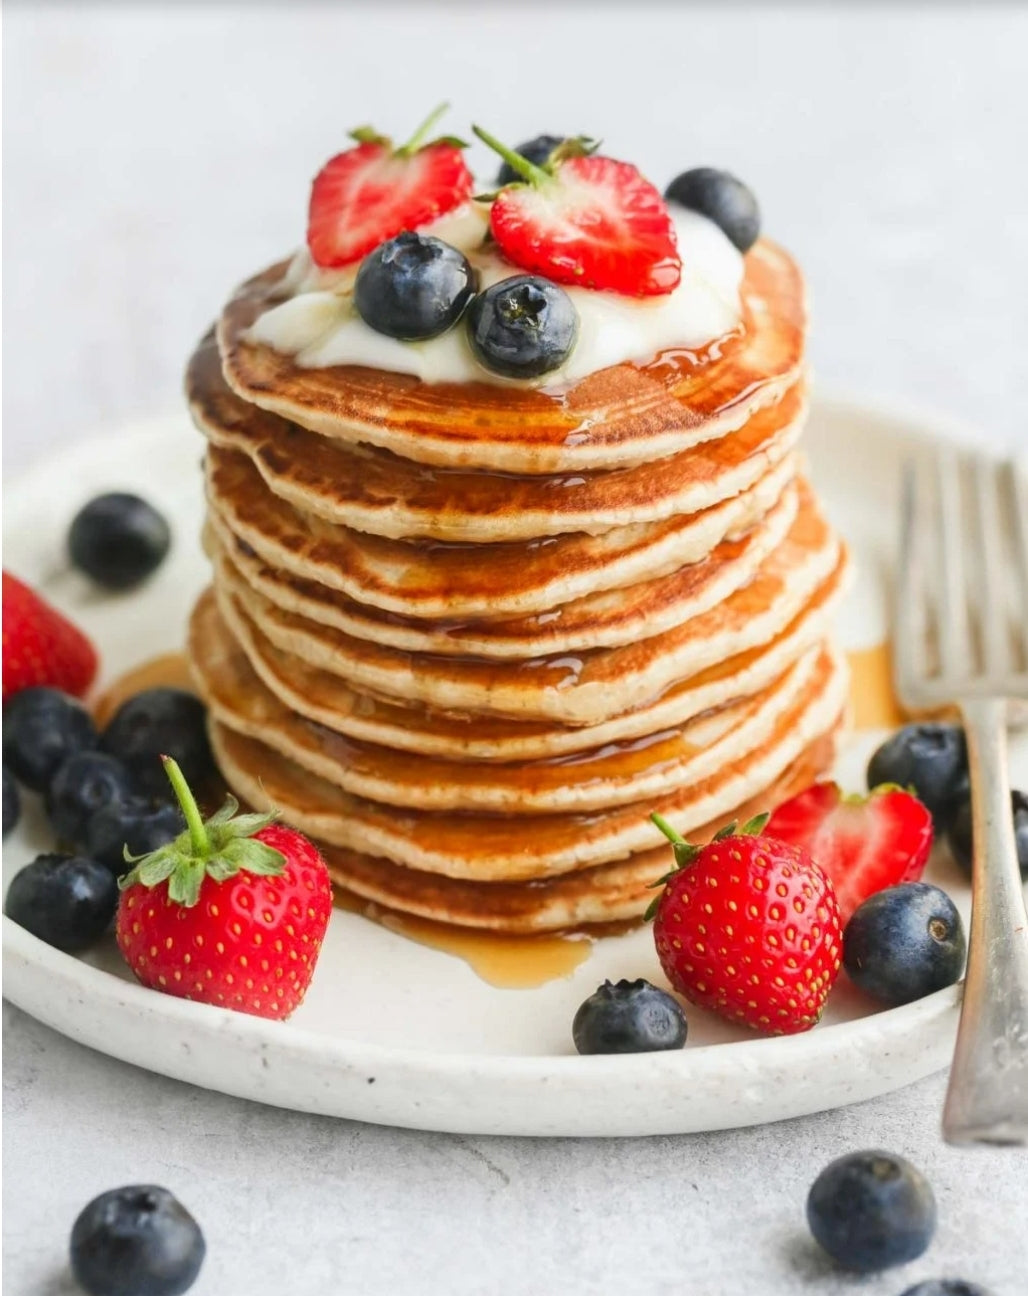 Pancakes 11/4 cup flour 3 teaspoon baking powder 1 tablespoon sugar 1/2 teaspoon salt 1 egg 1/2 cup milk 2 tablespoons oil CustomClothingBoutique.com 1. Mix all the ingredients together well. 2. Pour onto the skillet. 3. Flip once.